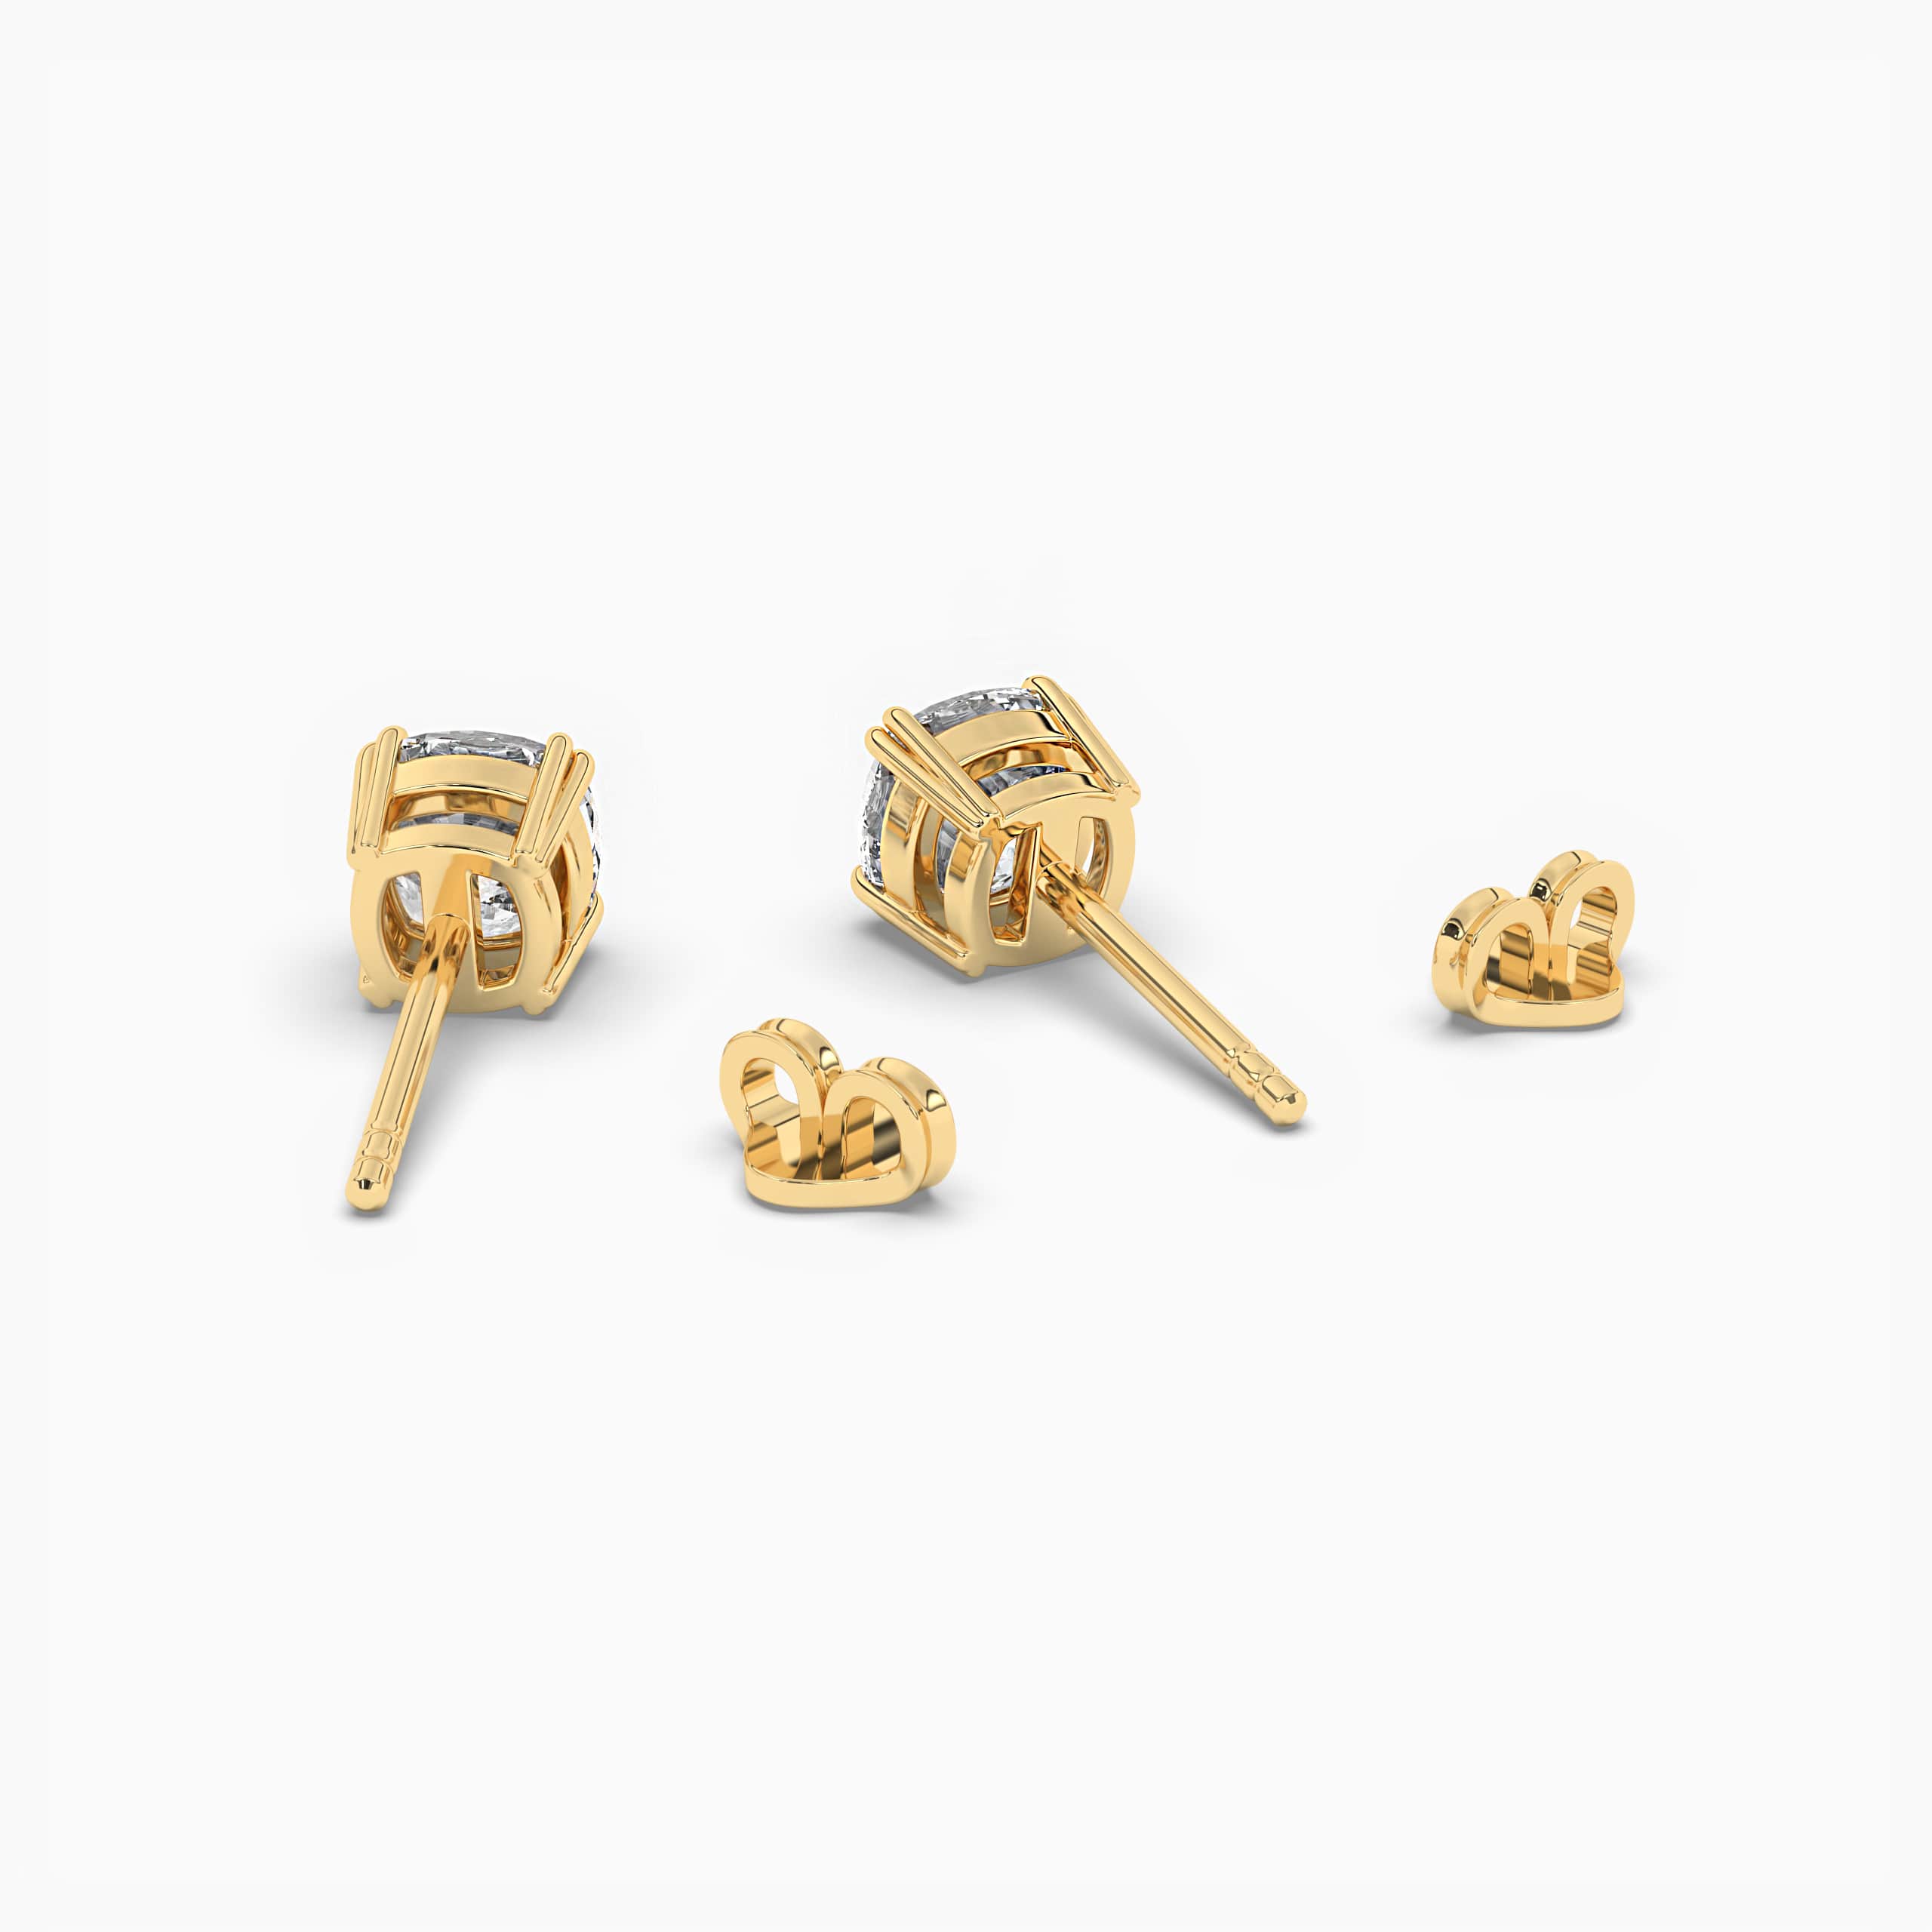  Solitaire Cushion Cut Earring in  Gold